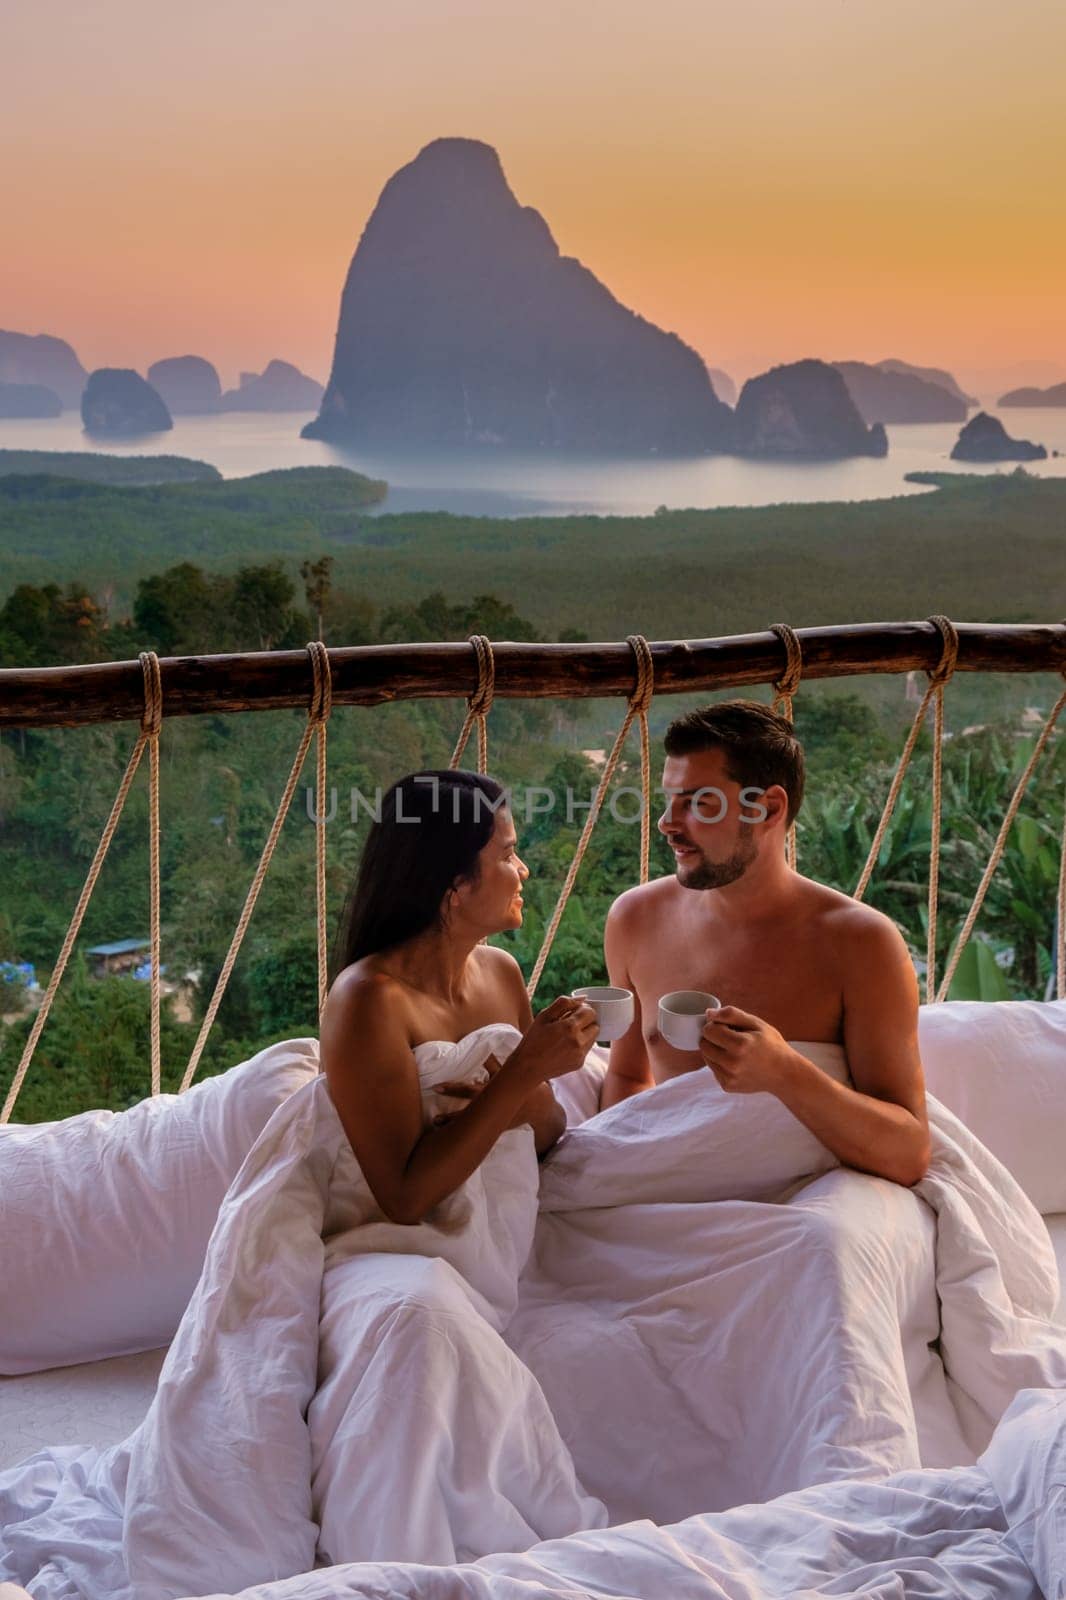 A couple in an outdoor bedroom watching the sunrise over Sametnangshe mountains in Phangnga Bay with mangrove forest in the Andaman Sea, men and woman in an outdoor bed at Phangnga, Thailand